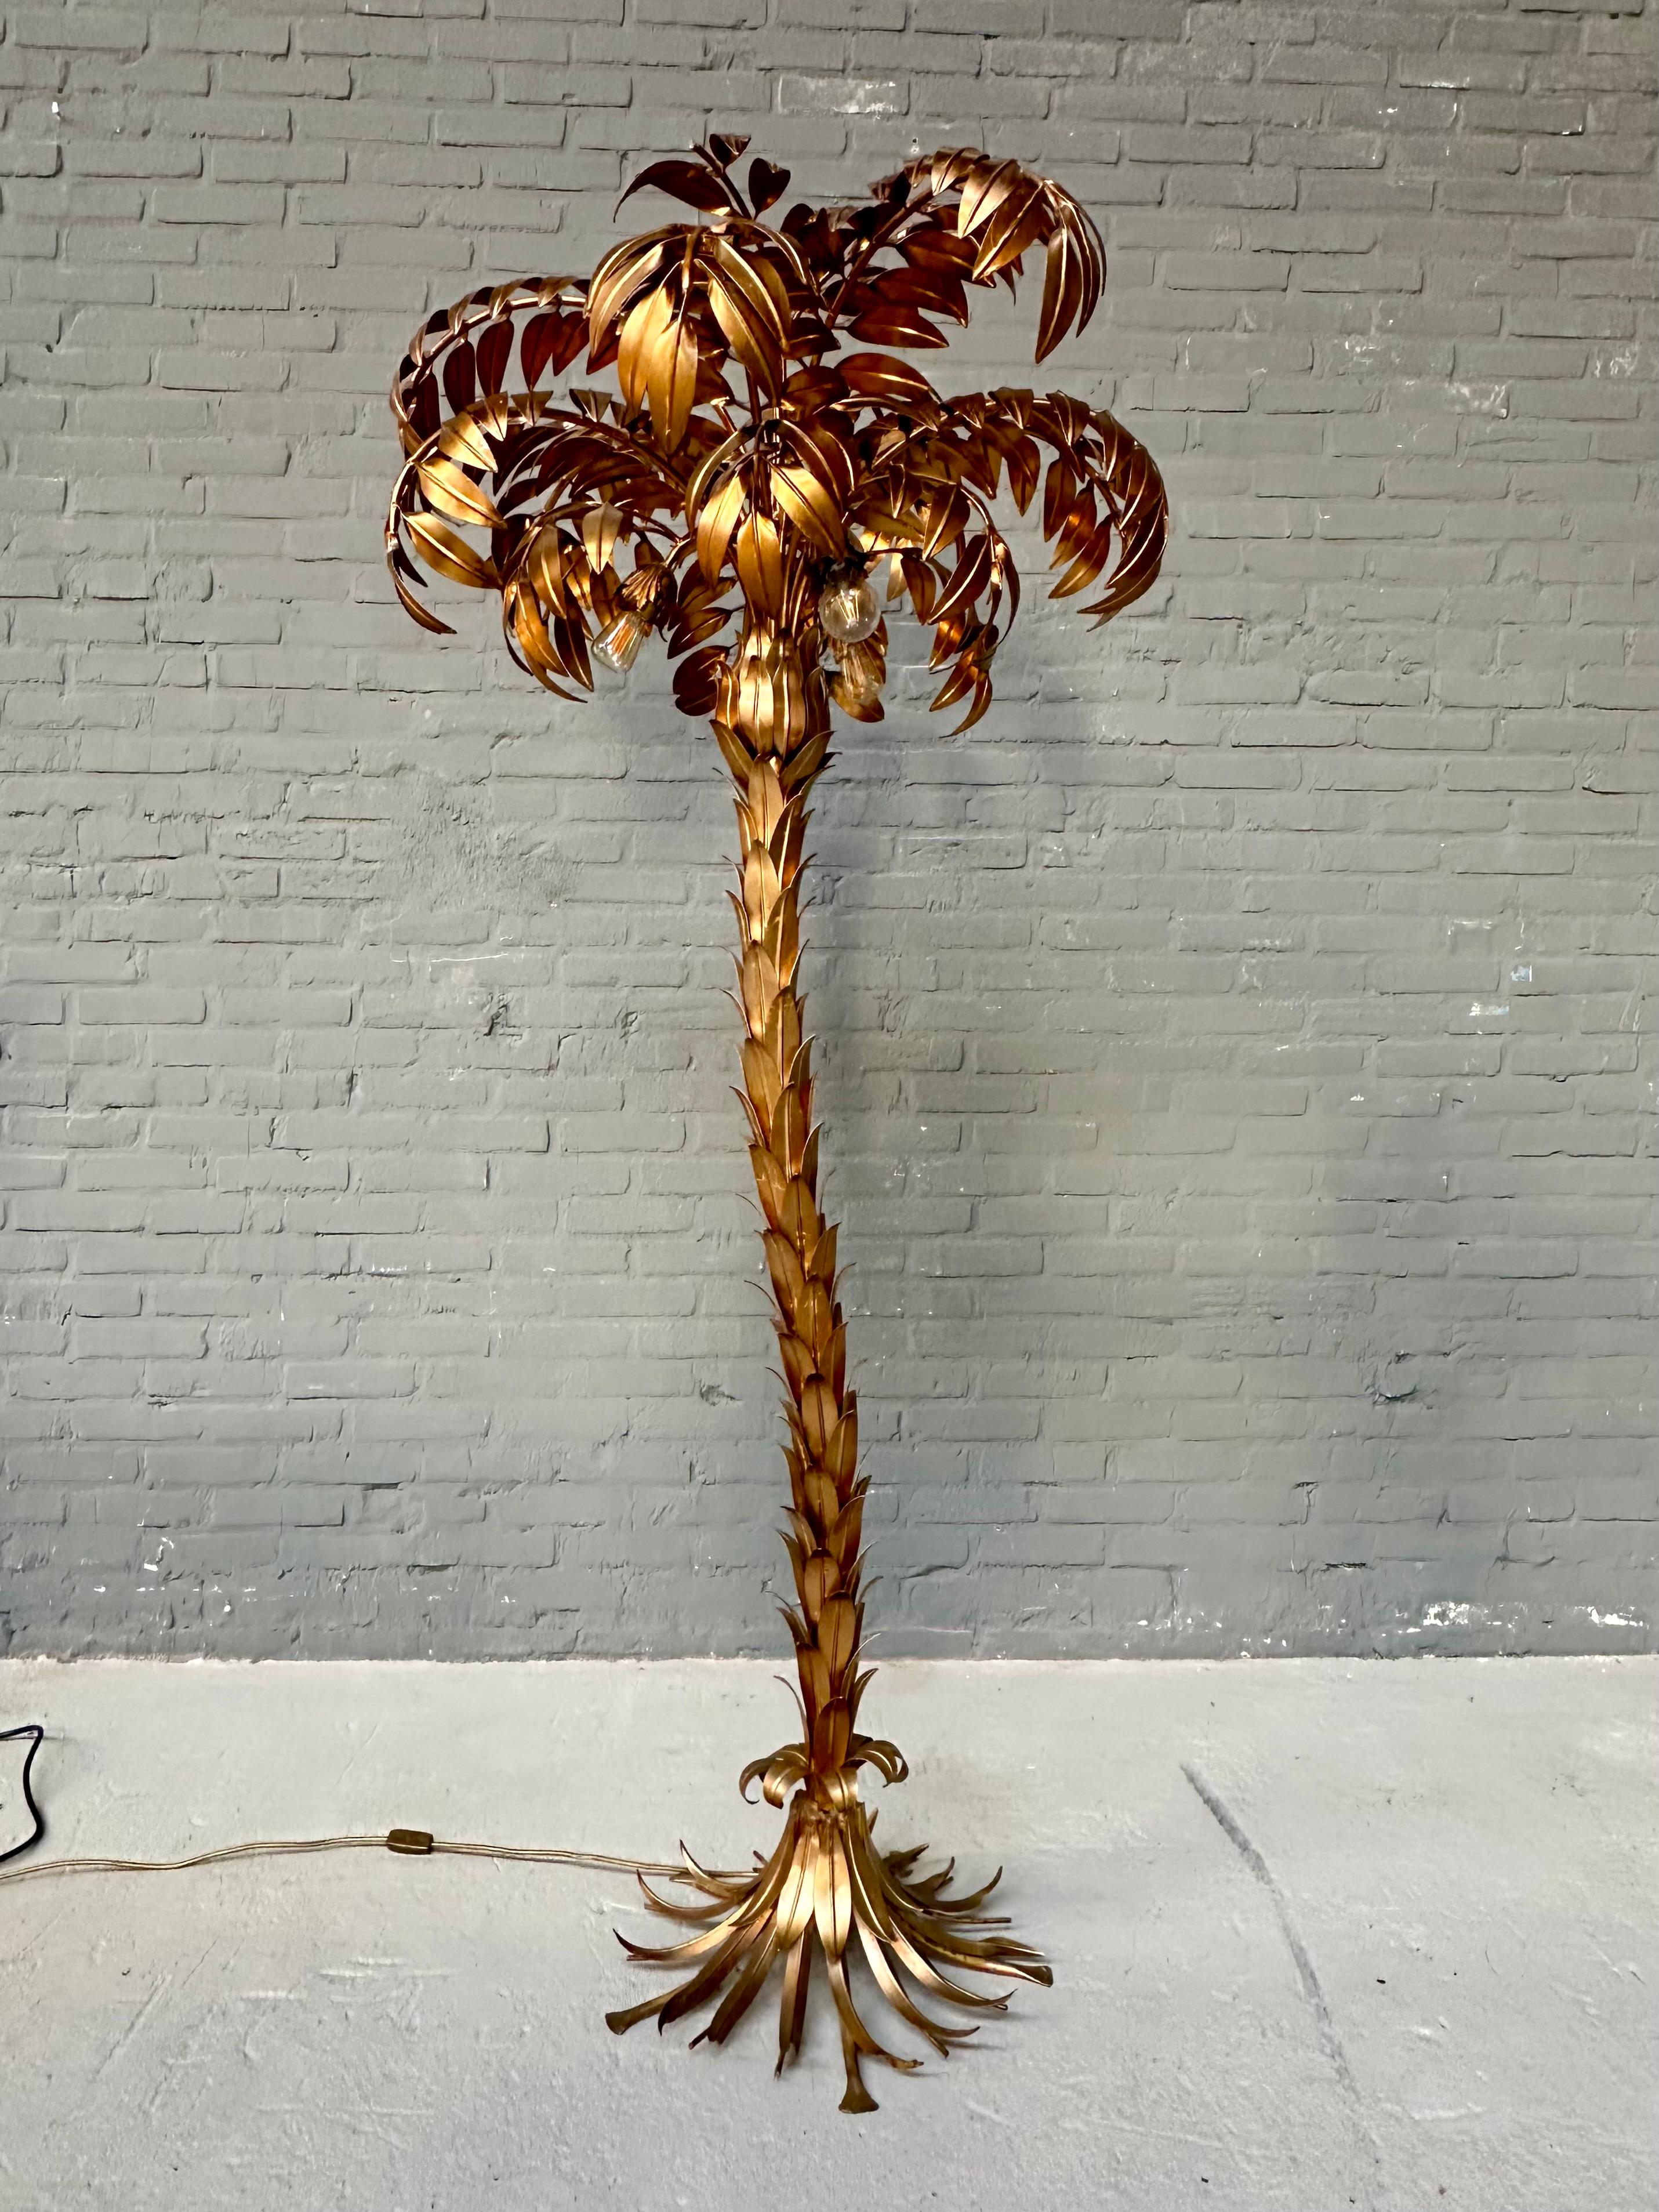 Probably the most iconic piece of art designed by the German Hans Kogl.
The large gilded metal palm tree floorlamp. Designed and manufactured starting in Germany in the seventies. This impressive floorlamp has 3 light points which give a magnificent